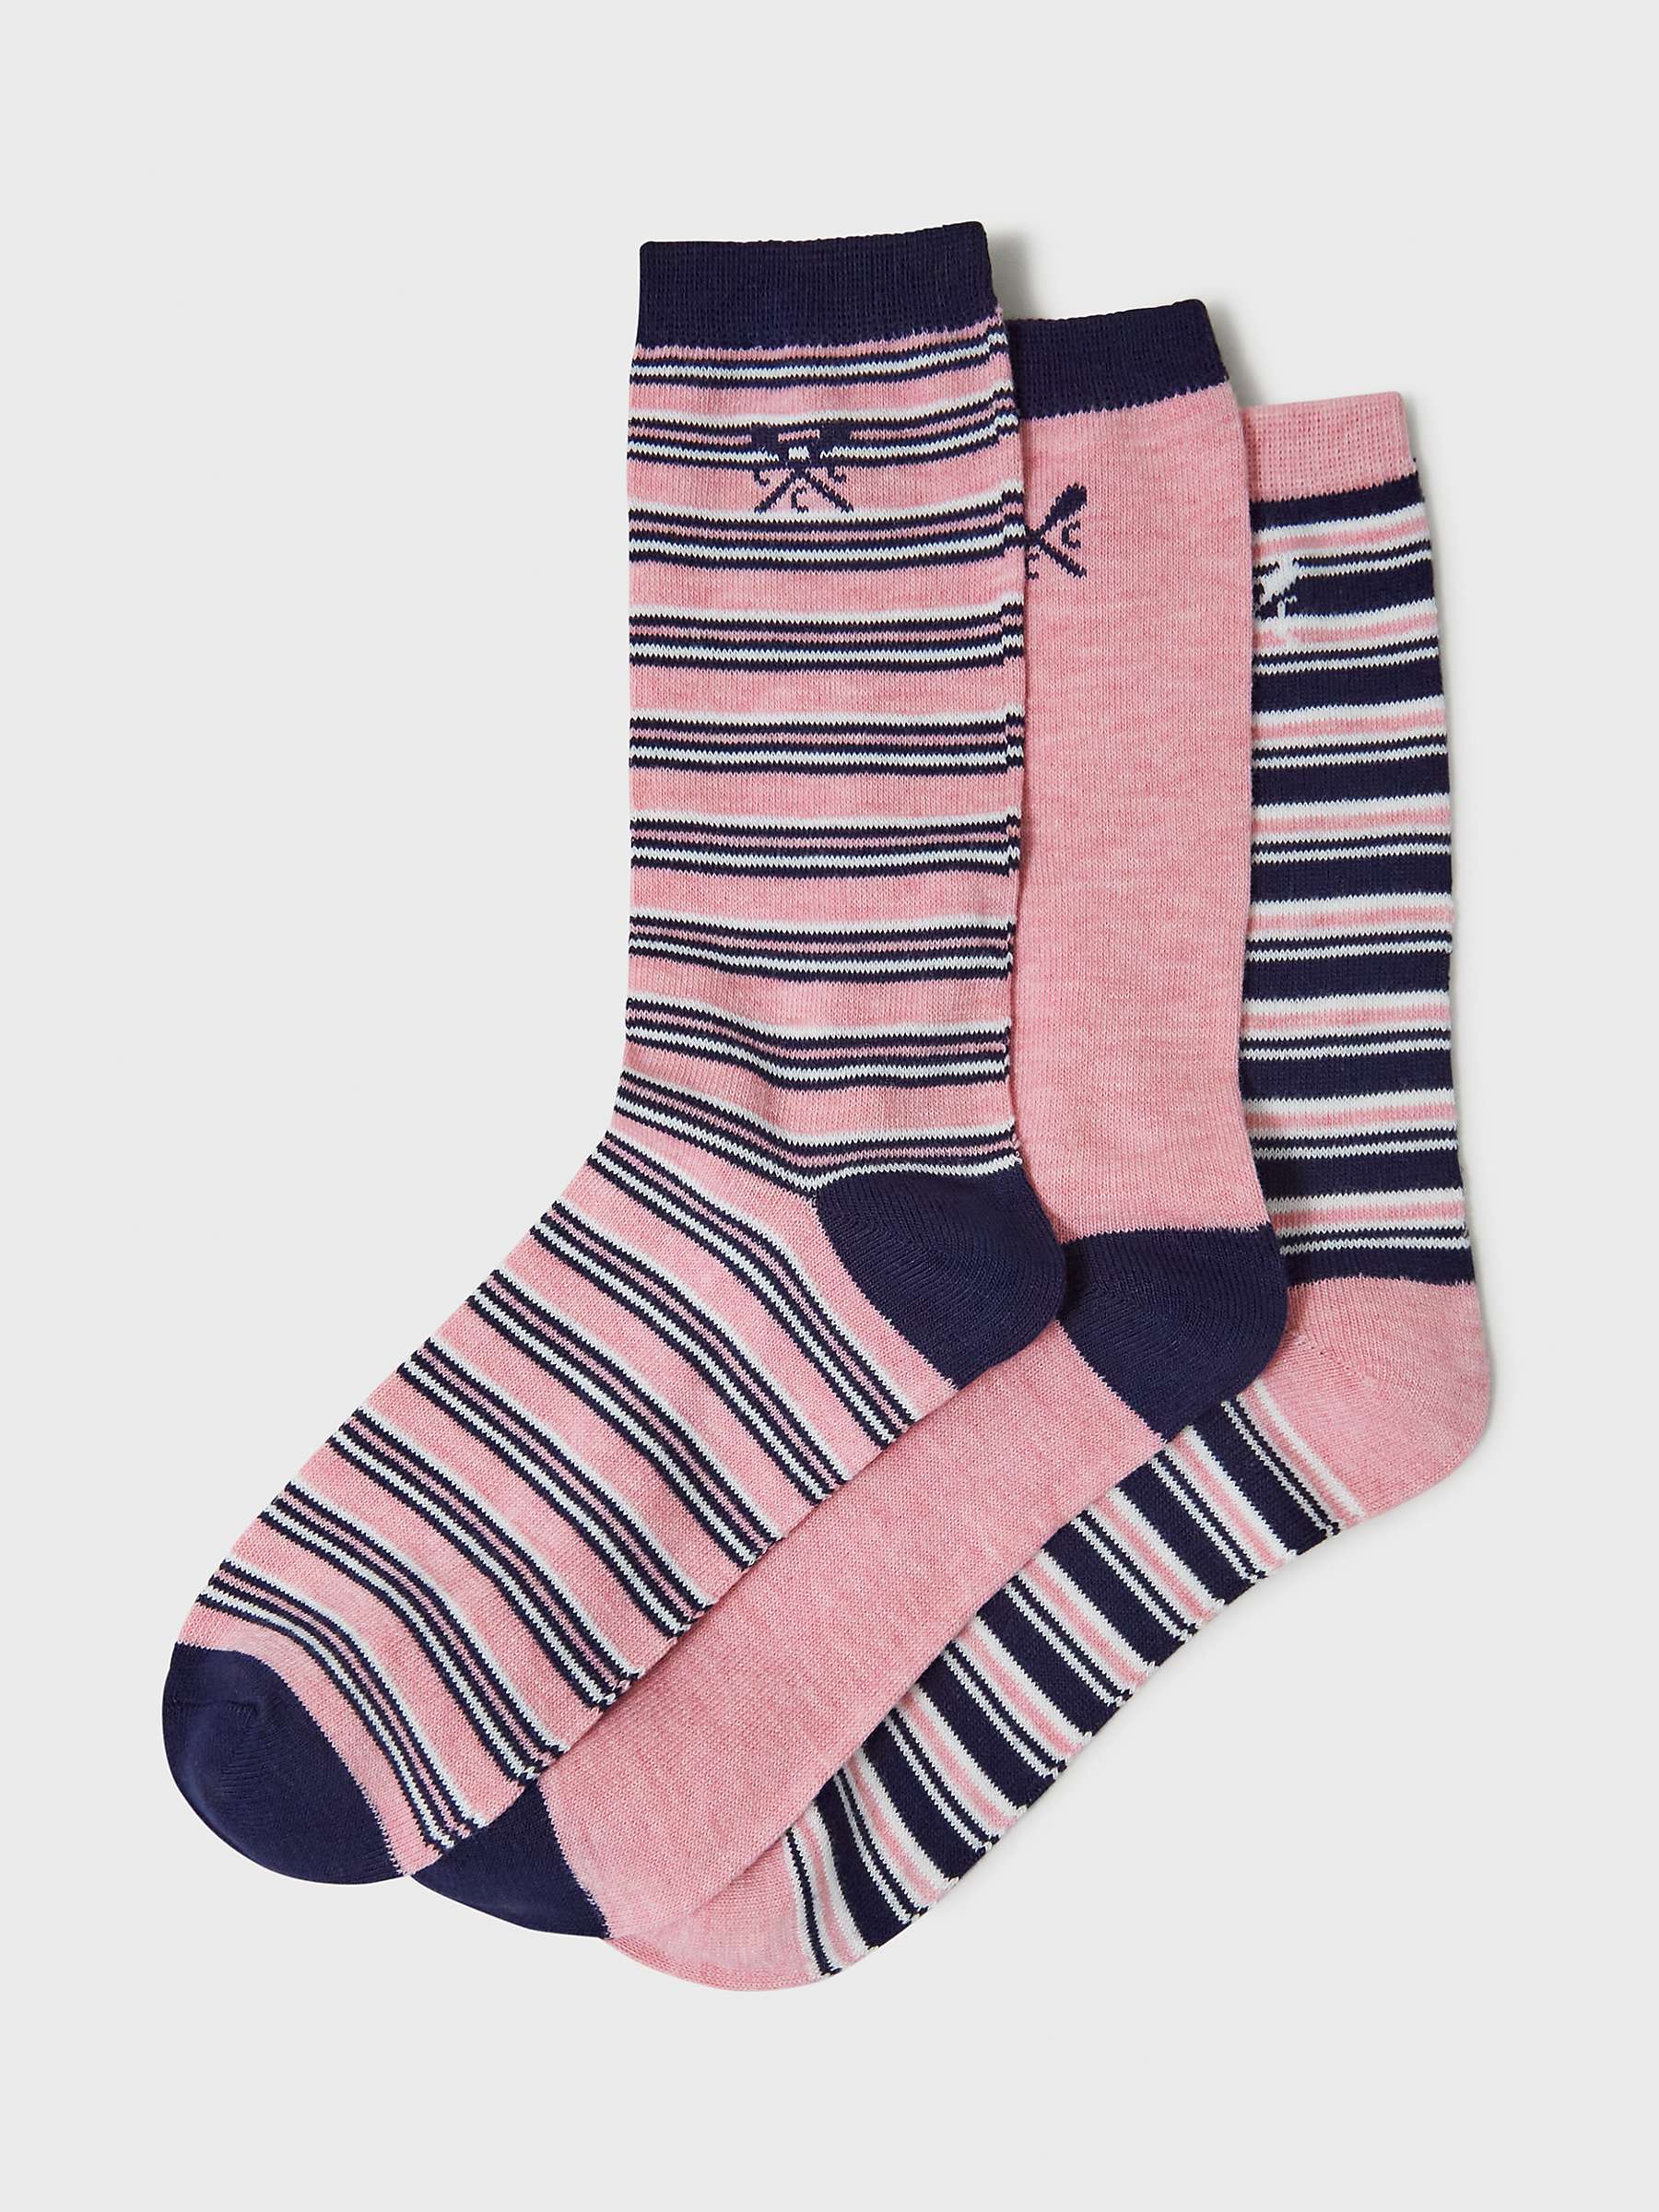 Buy Crew Clothing Plain and Stripe Bamboo Ankle Socks, Pack of 3 Online at johnlewis.com